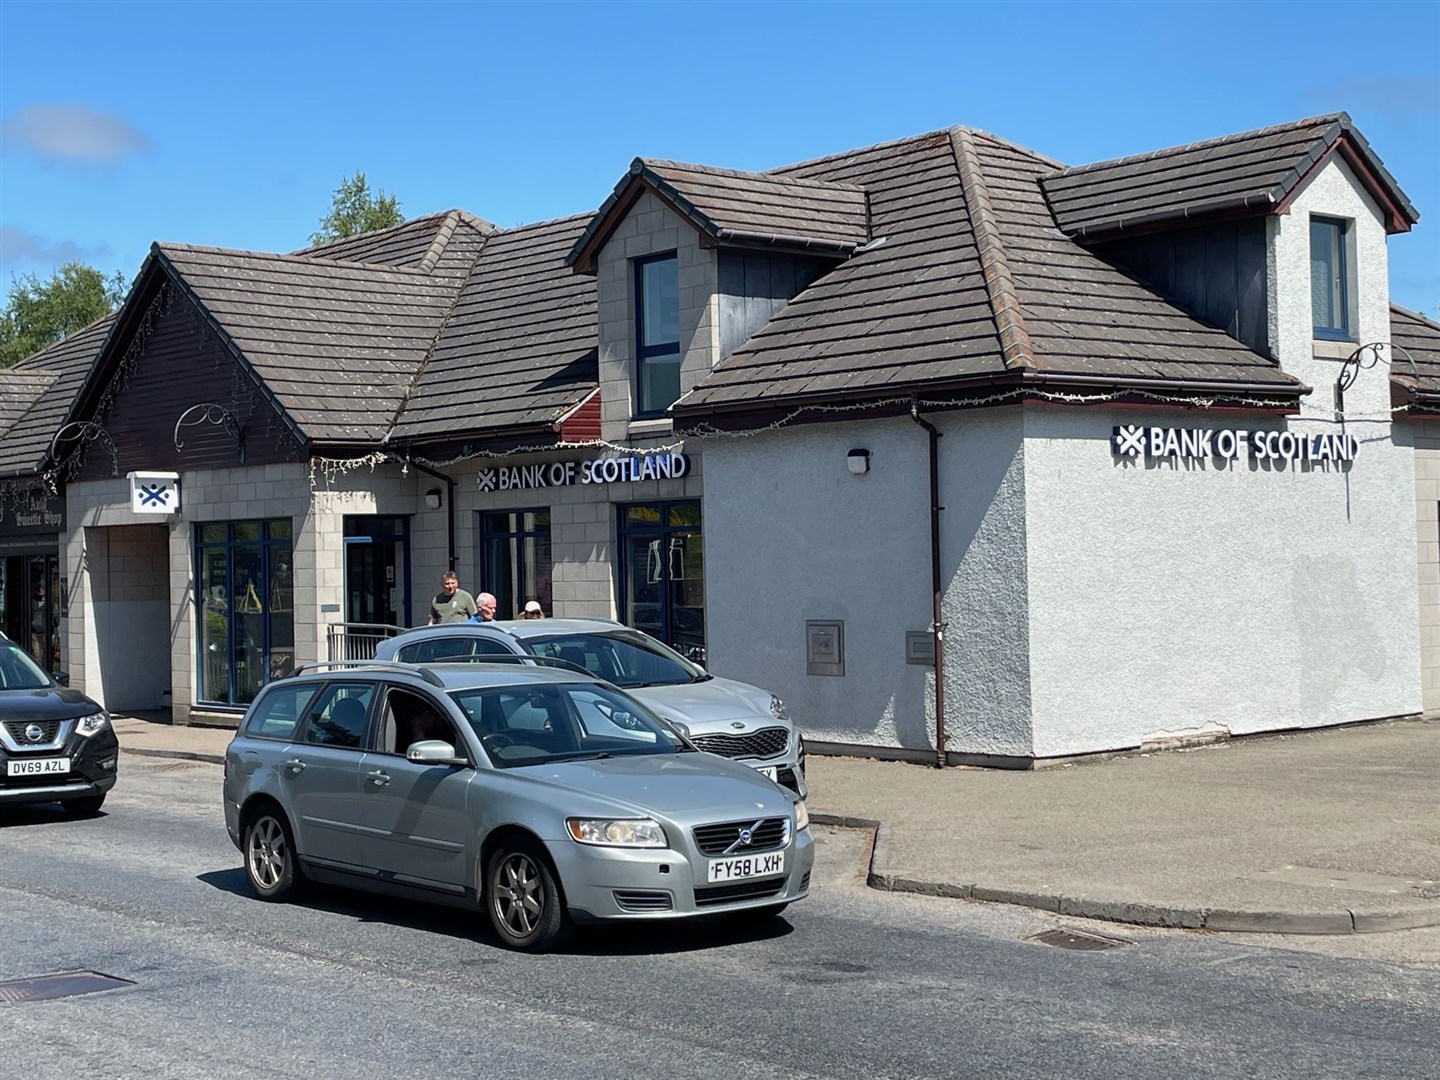 Closure of the branch will mean an end to High Street banking in Badenoch and Strathspey.